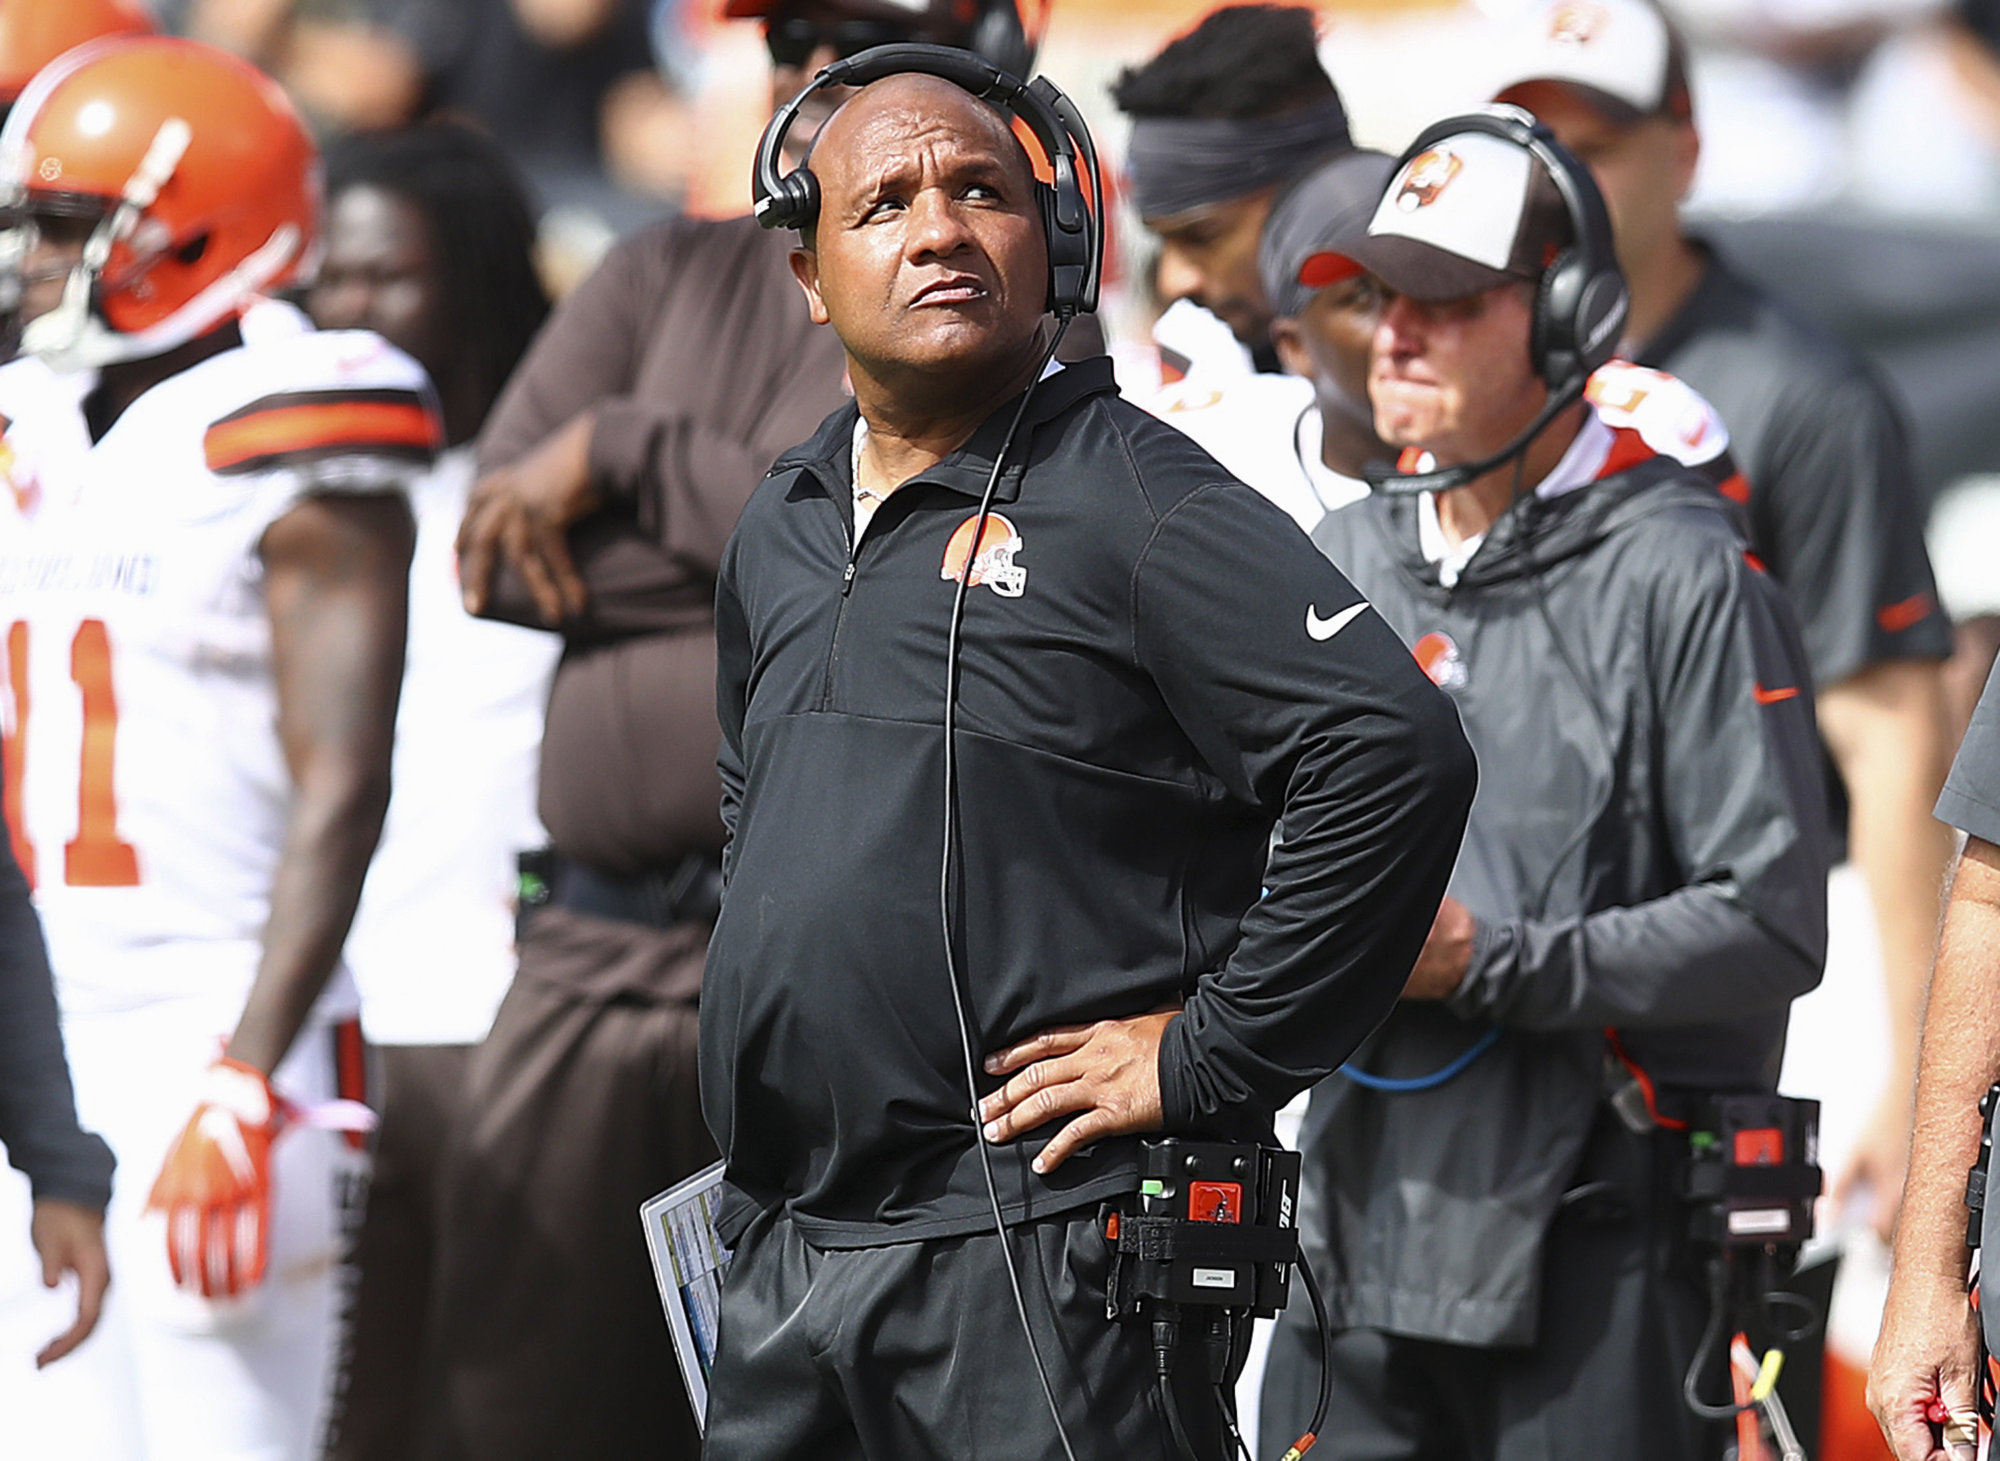 Cleveland Browns head coach Hue Jackson watches from the sideline during the first half of an NFL football game against the Oakland Raiders in Oakland, Calif., Sunday, Sept. 30, 2018. (AP Photo/Ben Margot)